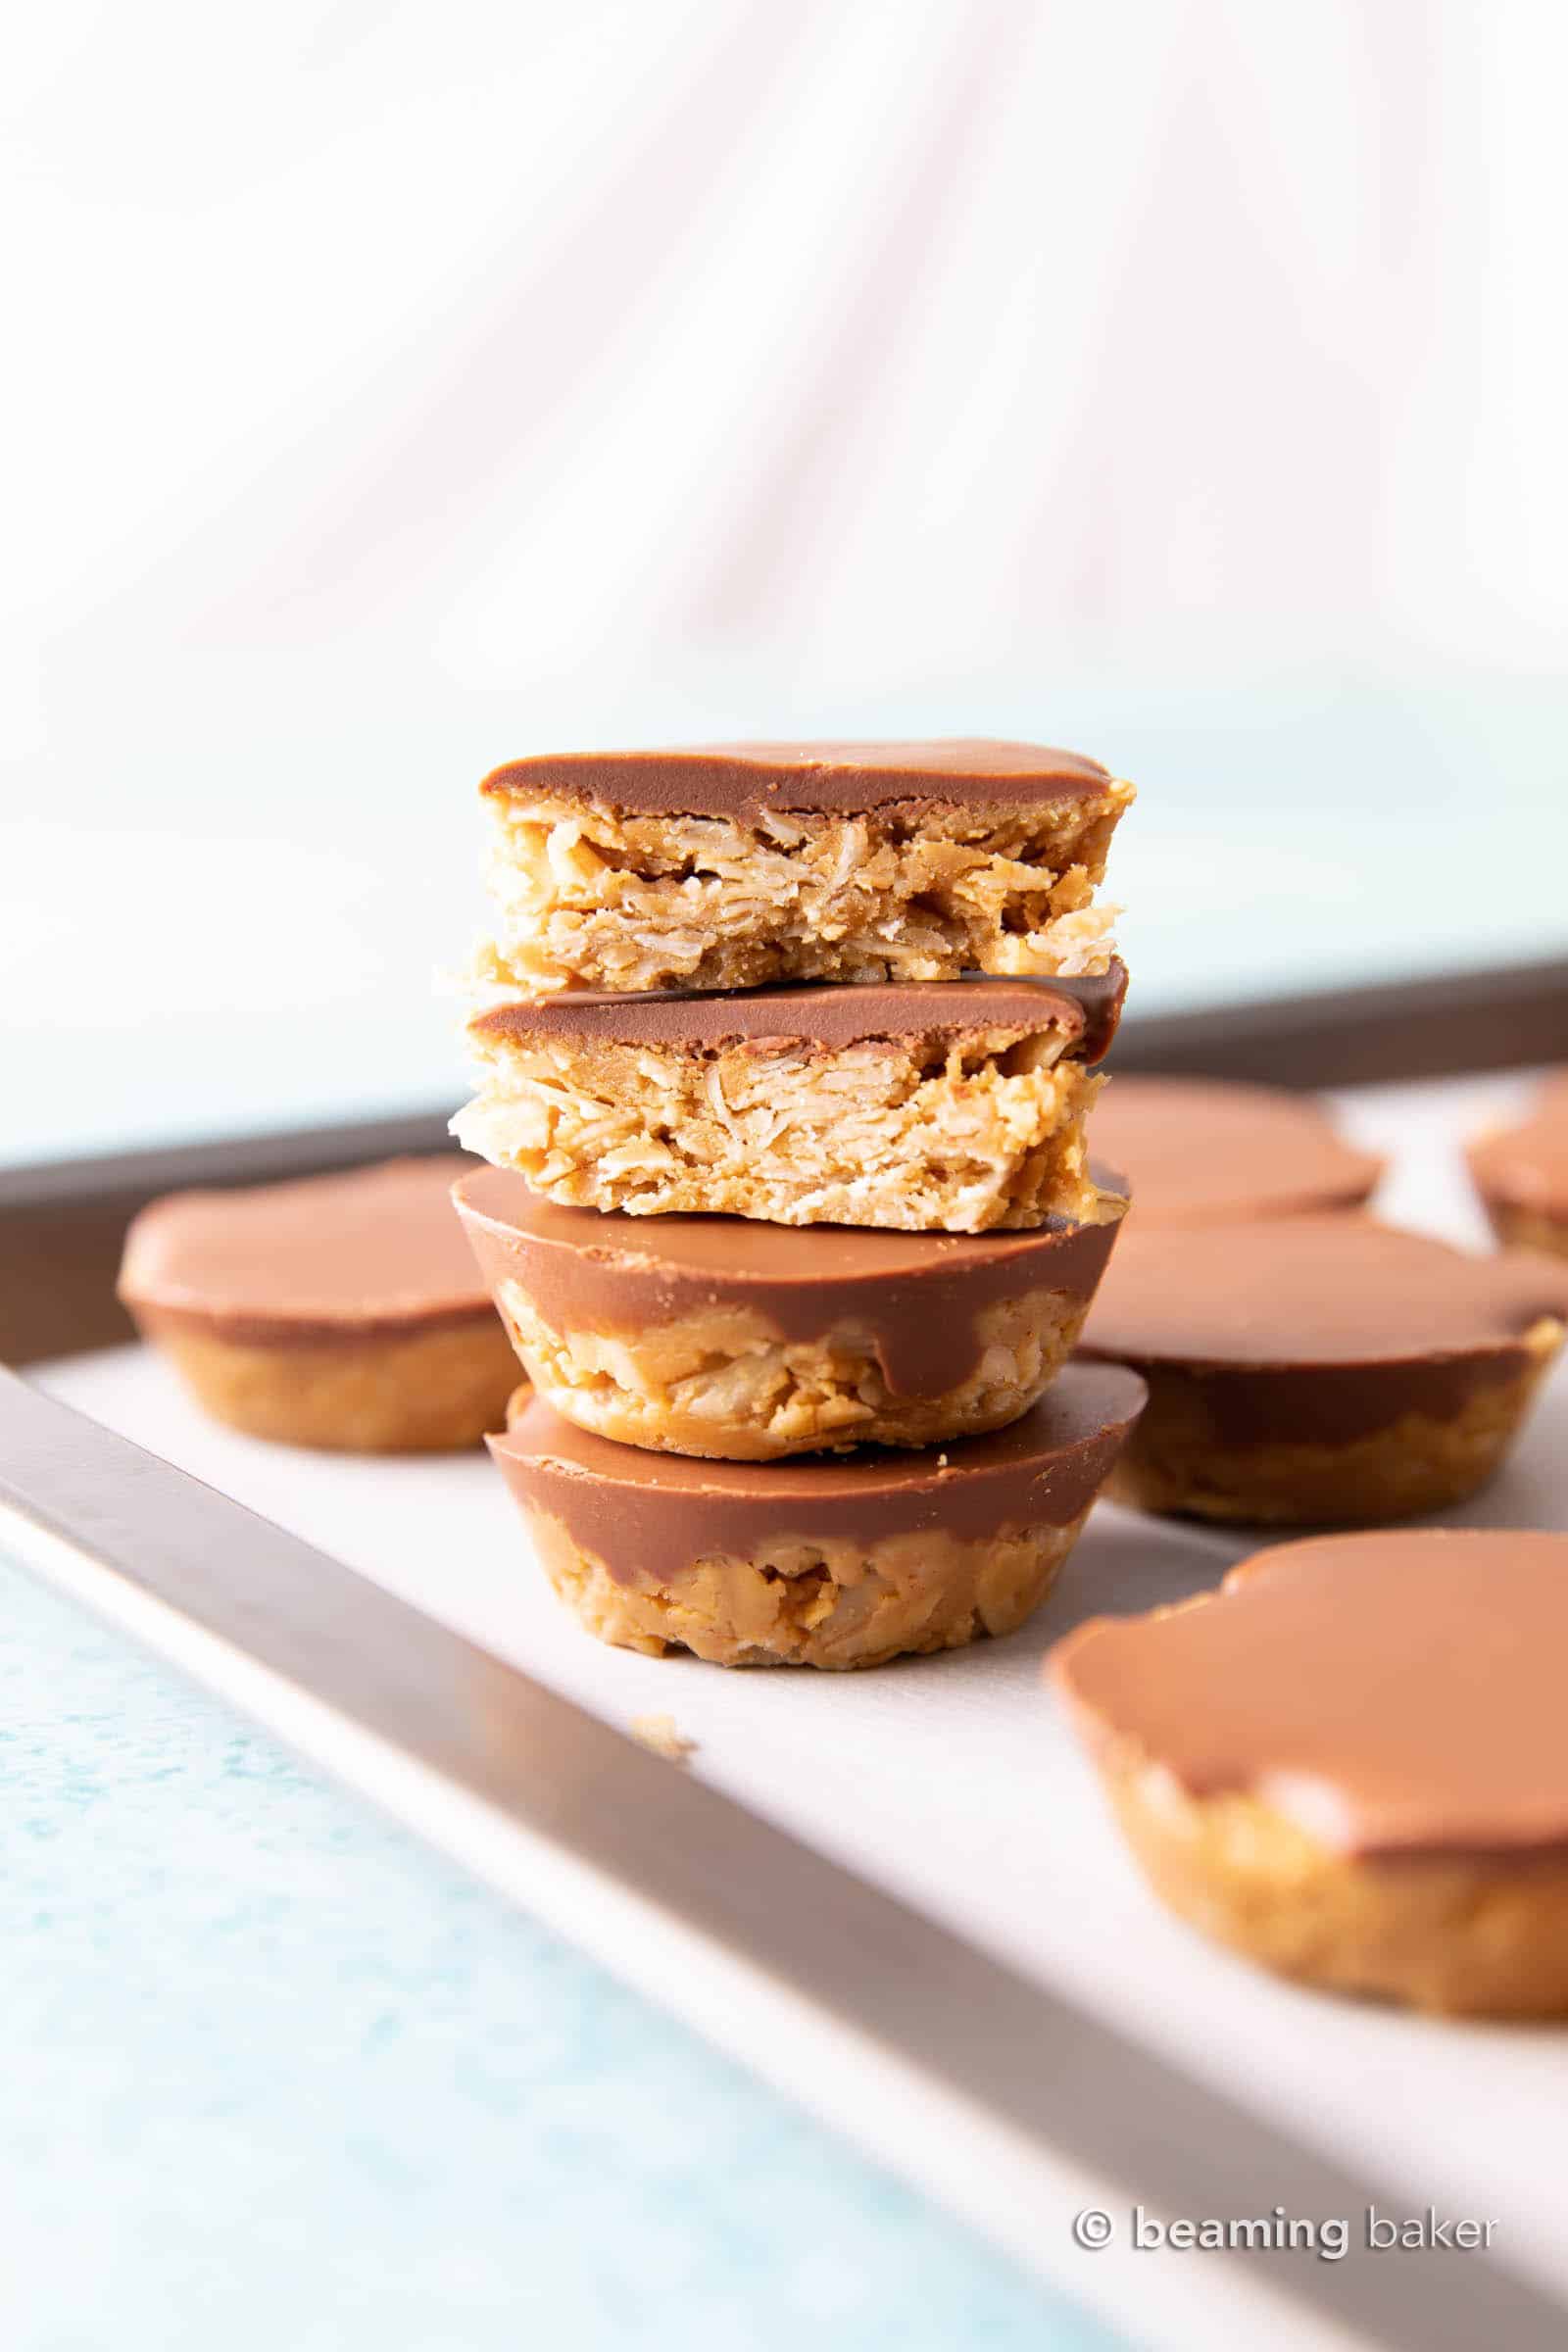 No Bake Chocolate Peanut Butter Oatmeal Cups (GF): an easy, 4 ingredient recipe for chocolate PB oatmeal cups! A delicious on-the-go snack that’s packed with healthy ingredients & protein-rich YUM. #PeanutButter #NoBake #Chocolate #Oatmeal | Recipe at BeamingBaker.com